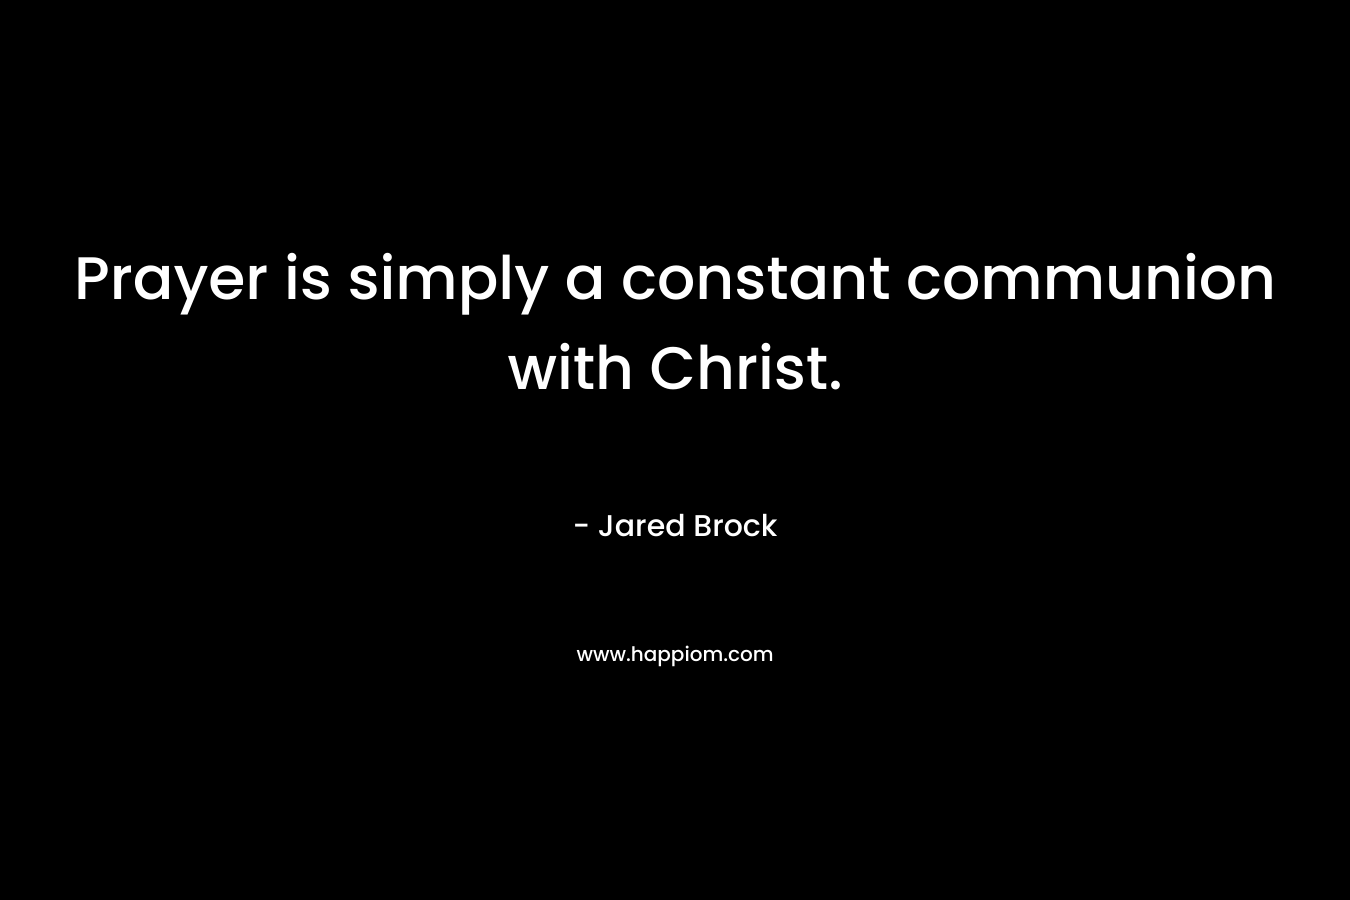 Prayer is simply a constant communion with Christ. – Jared Brock